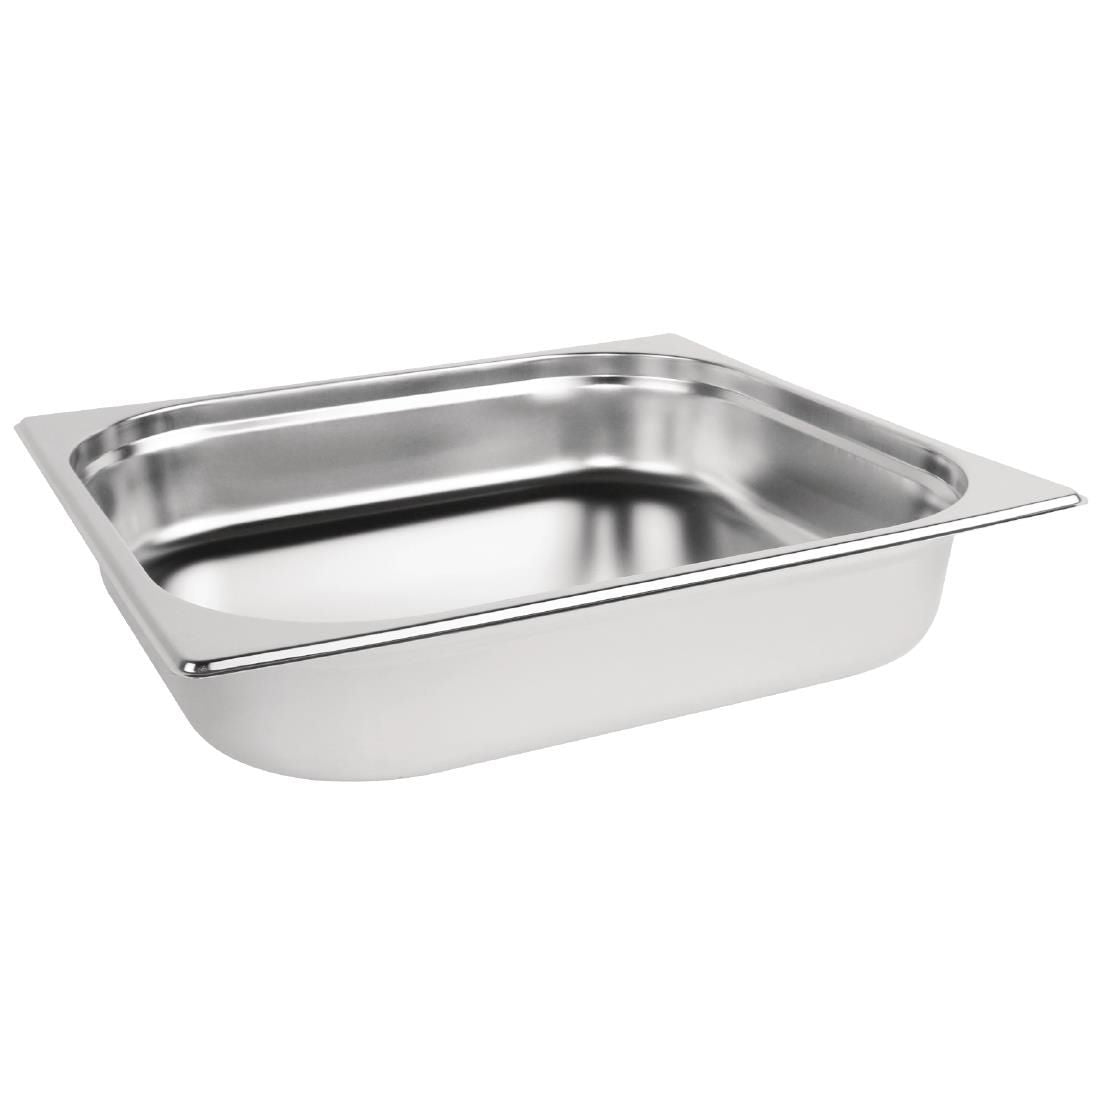 K811 Vogue Stainless Steel 2/3 Gastronorm Pan 65mm